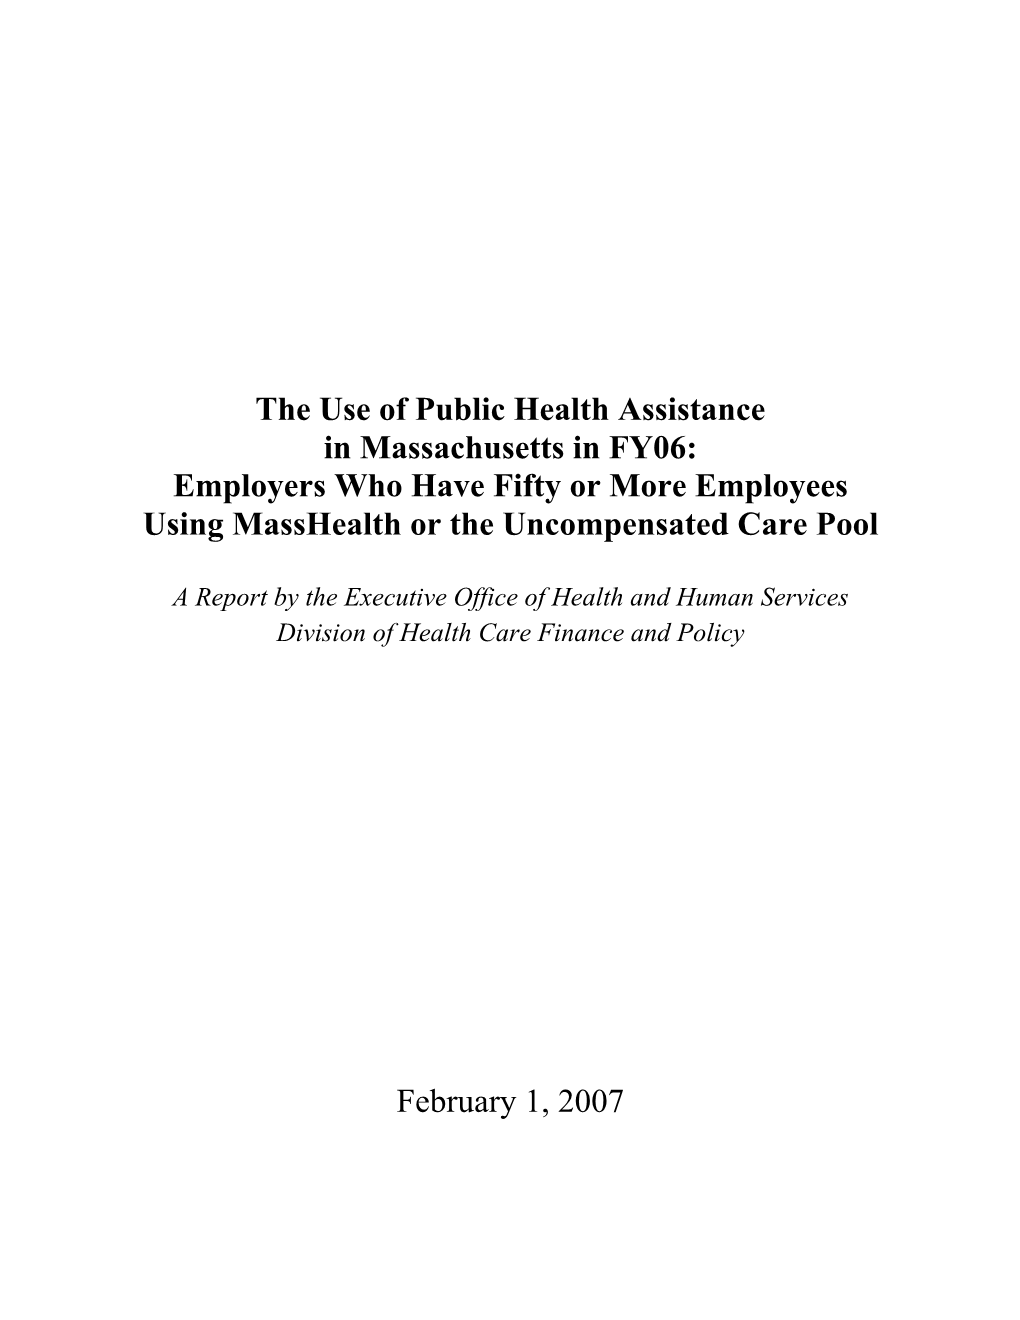 The Use of Public Health Assistance in Massachusetts in FY06: Employers Who Have Fifty Or More Employees Using Masshealth Or the Uncompensated Care Pool